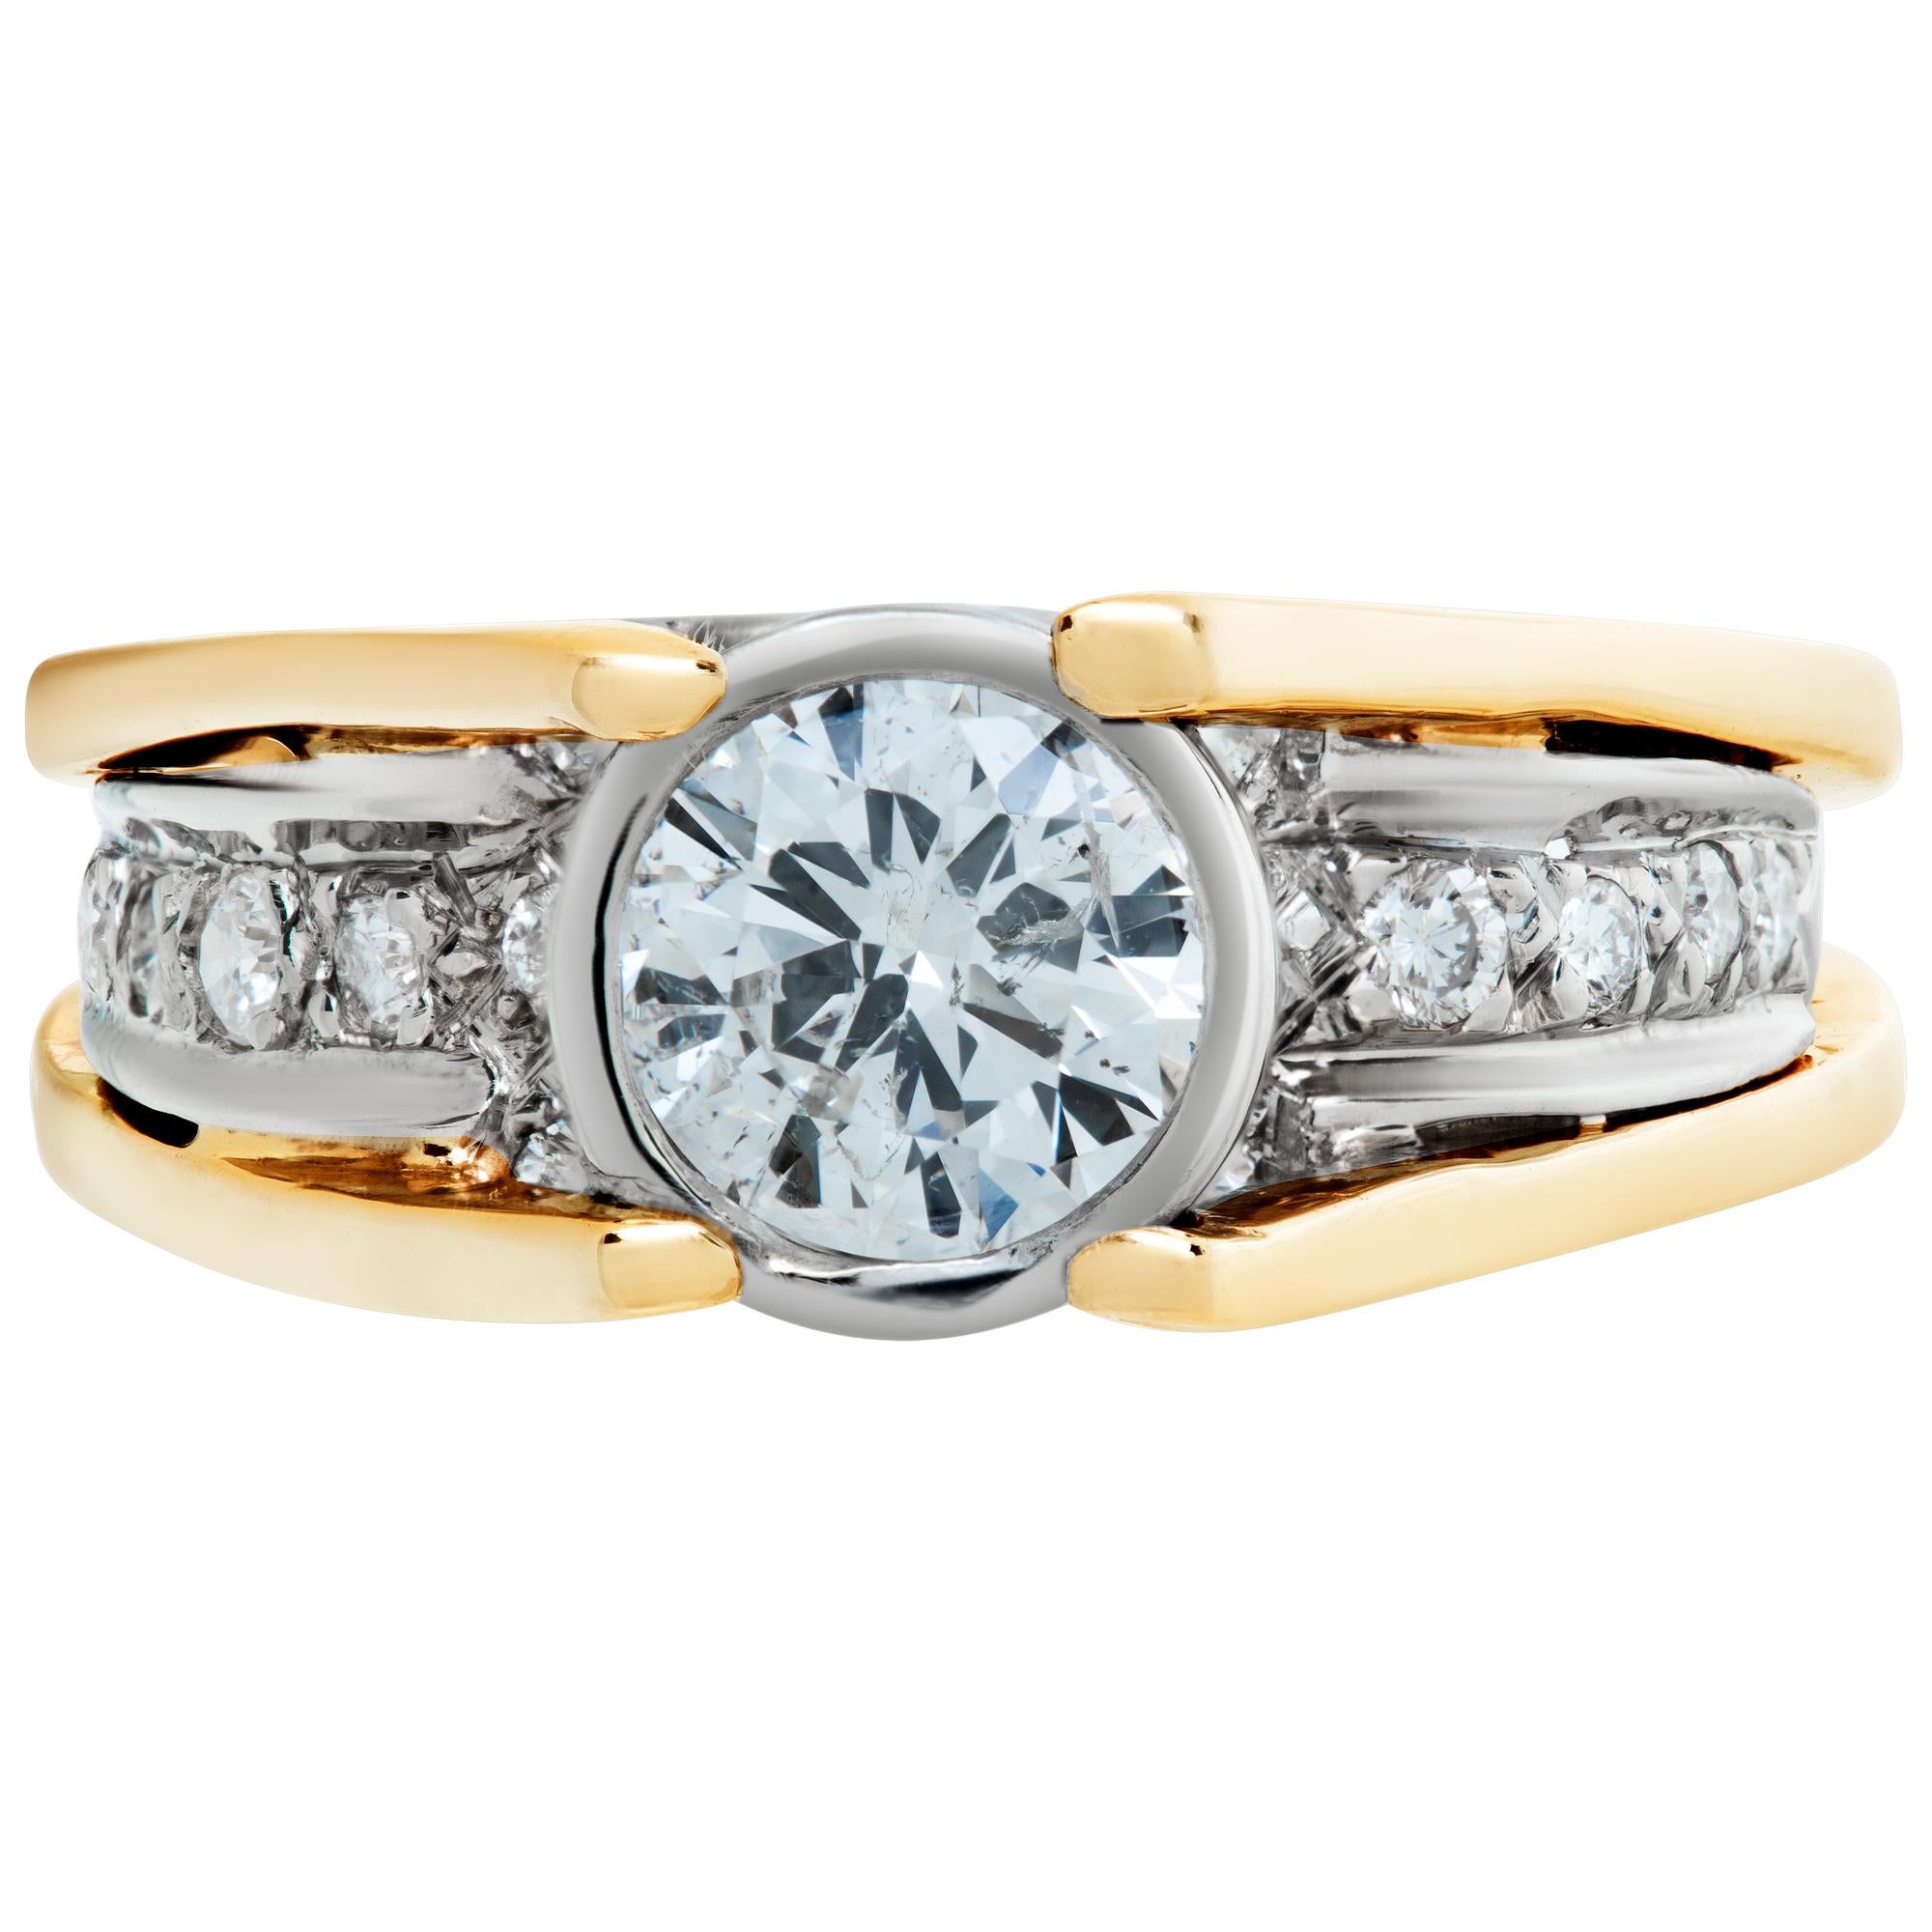 Bezel set approximately 0.65 carat H-I color, SI-I clarity diamond ring in 14k white and yellow gold with 0.50 carats in G-H color, VS-SI clarity diamond accents. Size 5, width tapers 3.5mm - 7mm.This Diamond ring is currently size 5 and some items